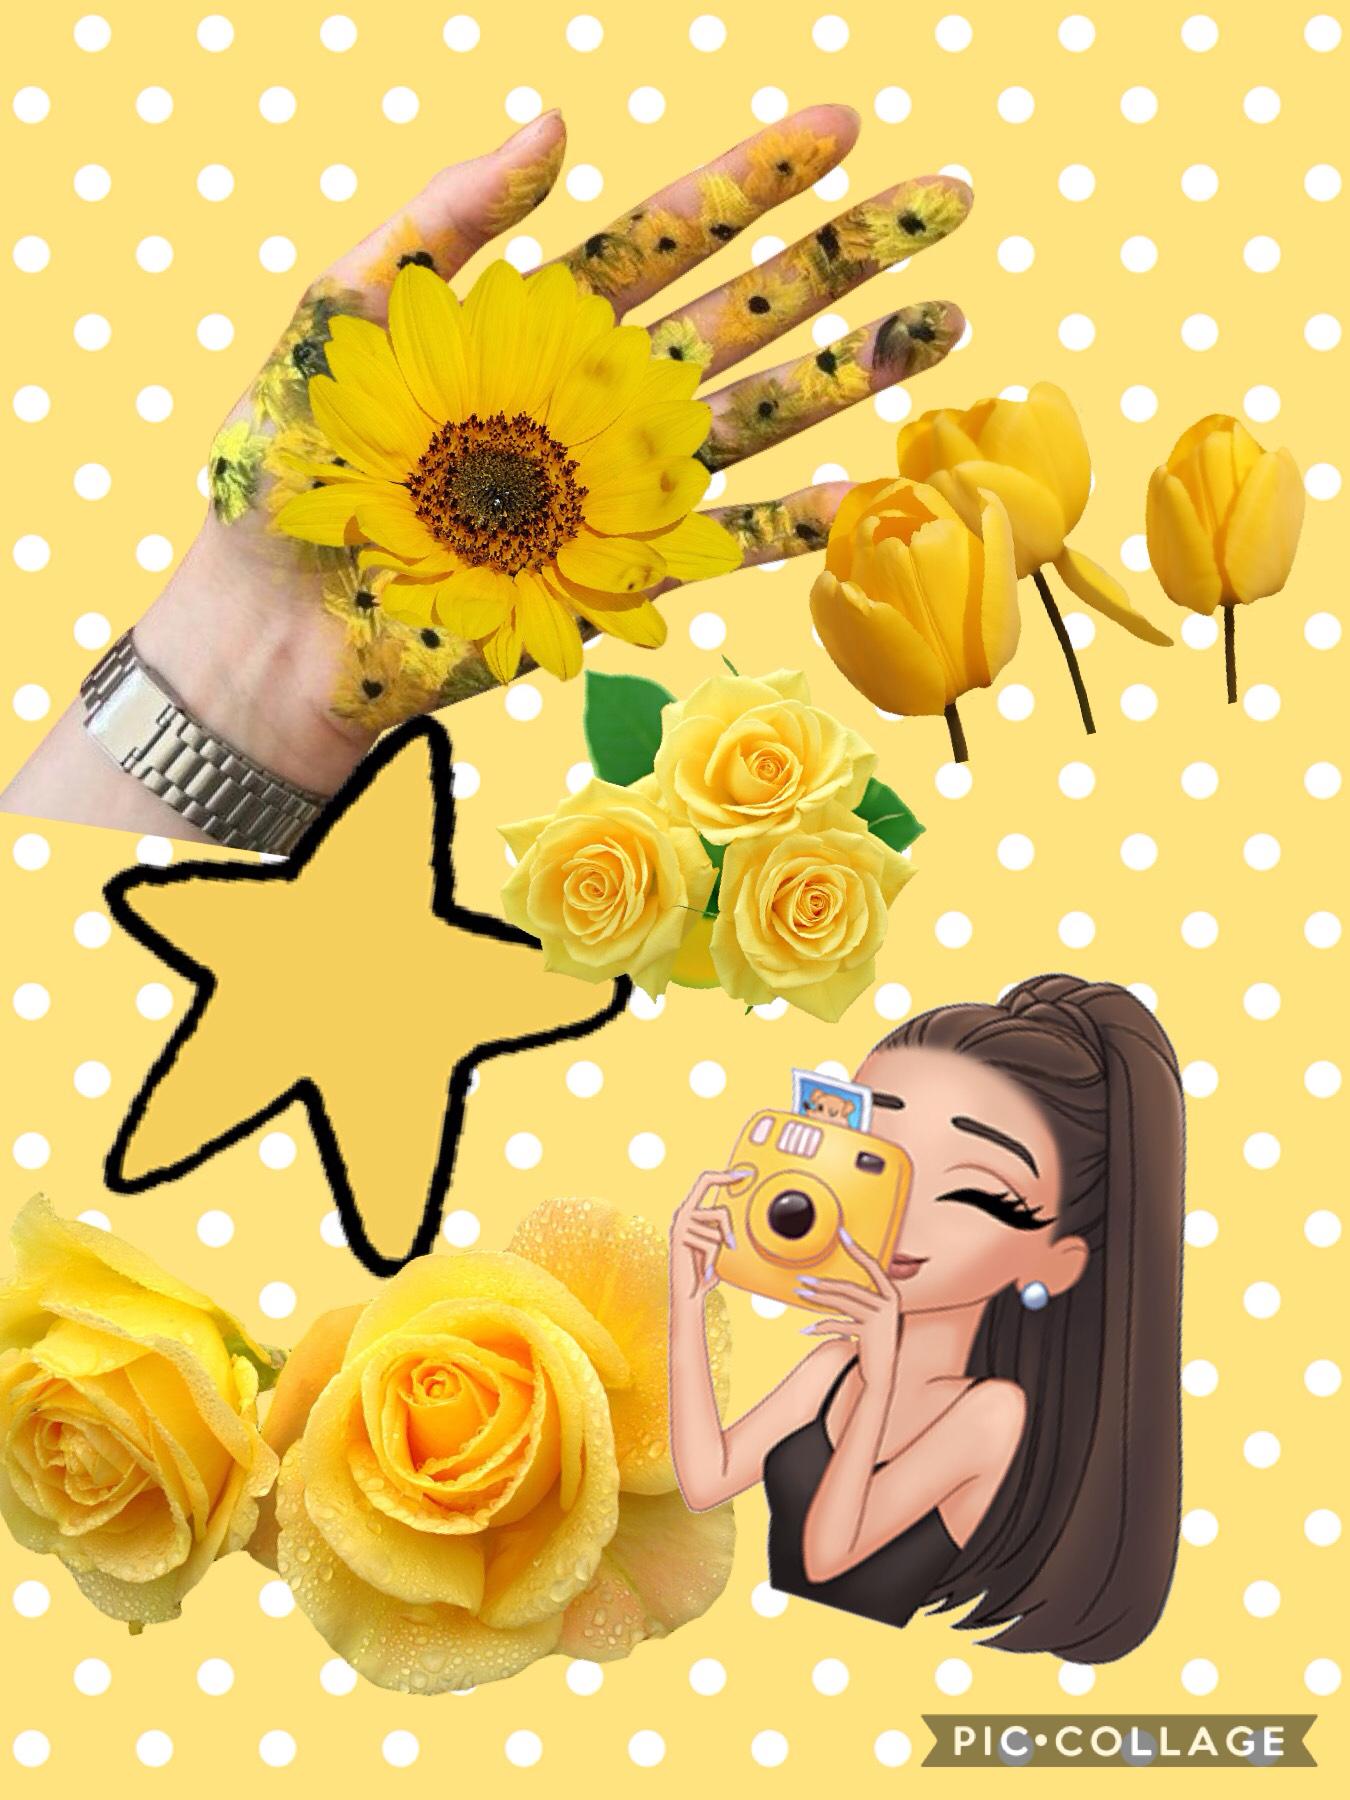 Hey guys it's aesthetic_ashleigh and the this is a yellow pic follow me ☺️😊